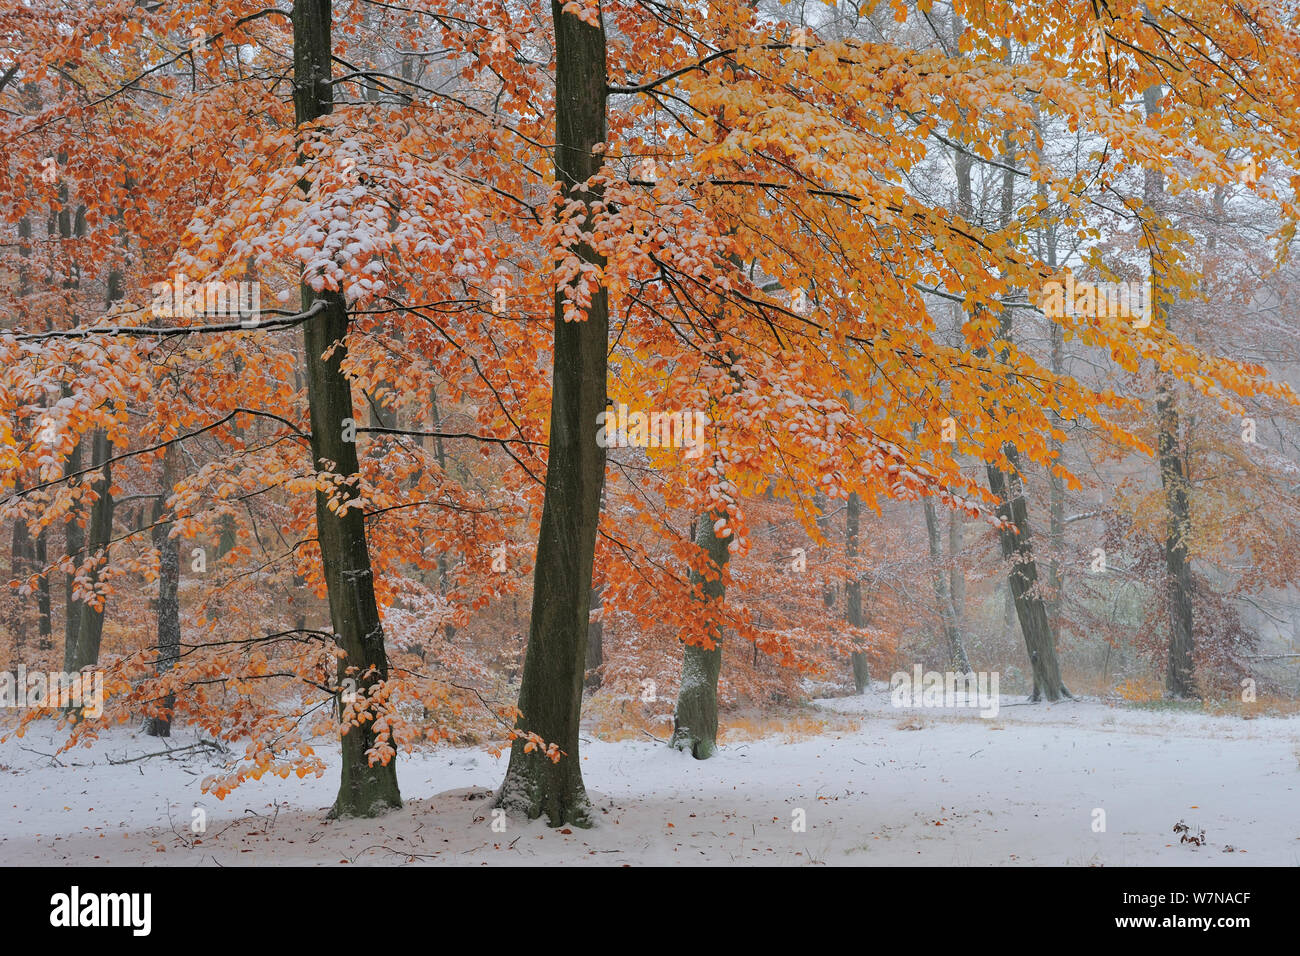 European Beech (Fagus sylvatica) woodland with autumn leaves and early fall of snow, Serrahn, Muritz National Park, UNESCO World Natural Heritage Site, November Stock Photo